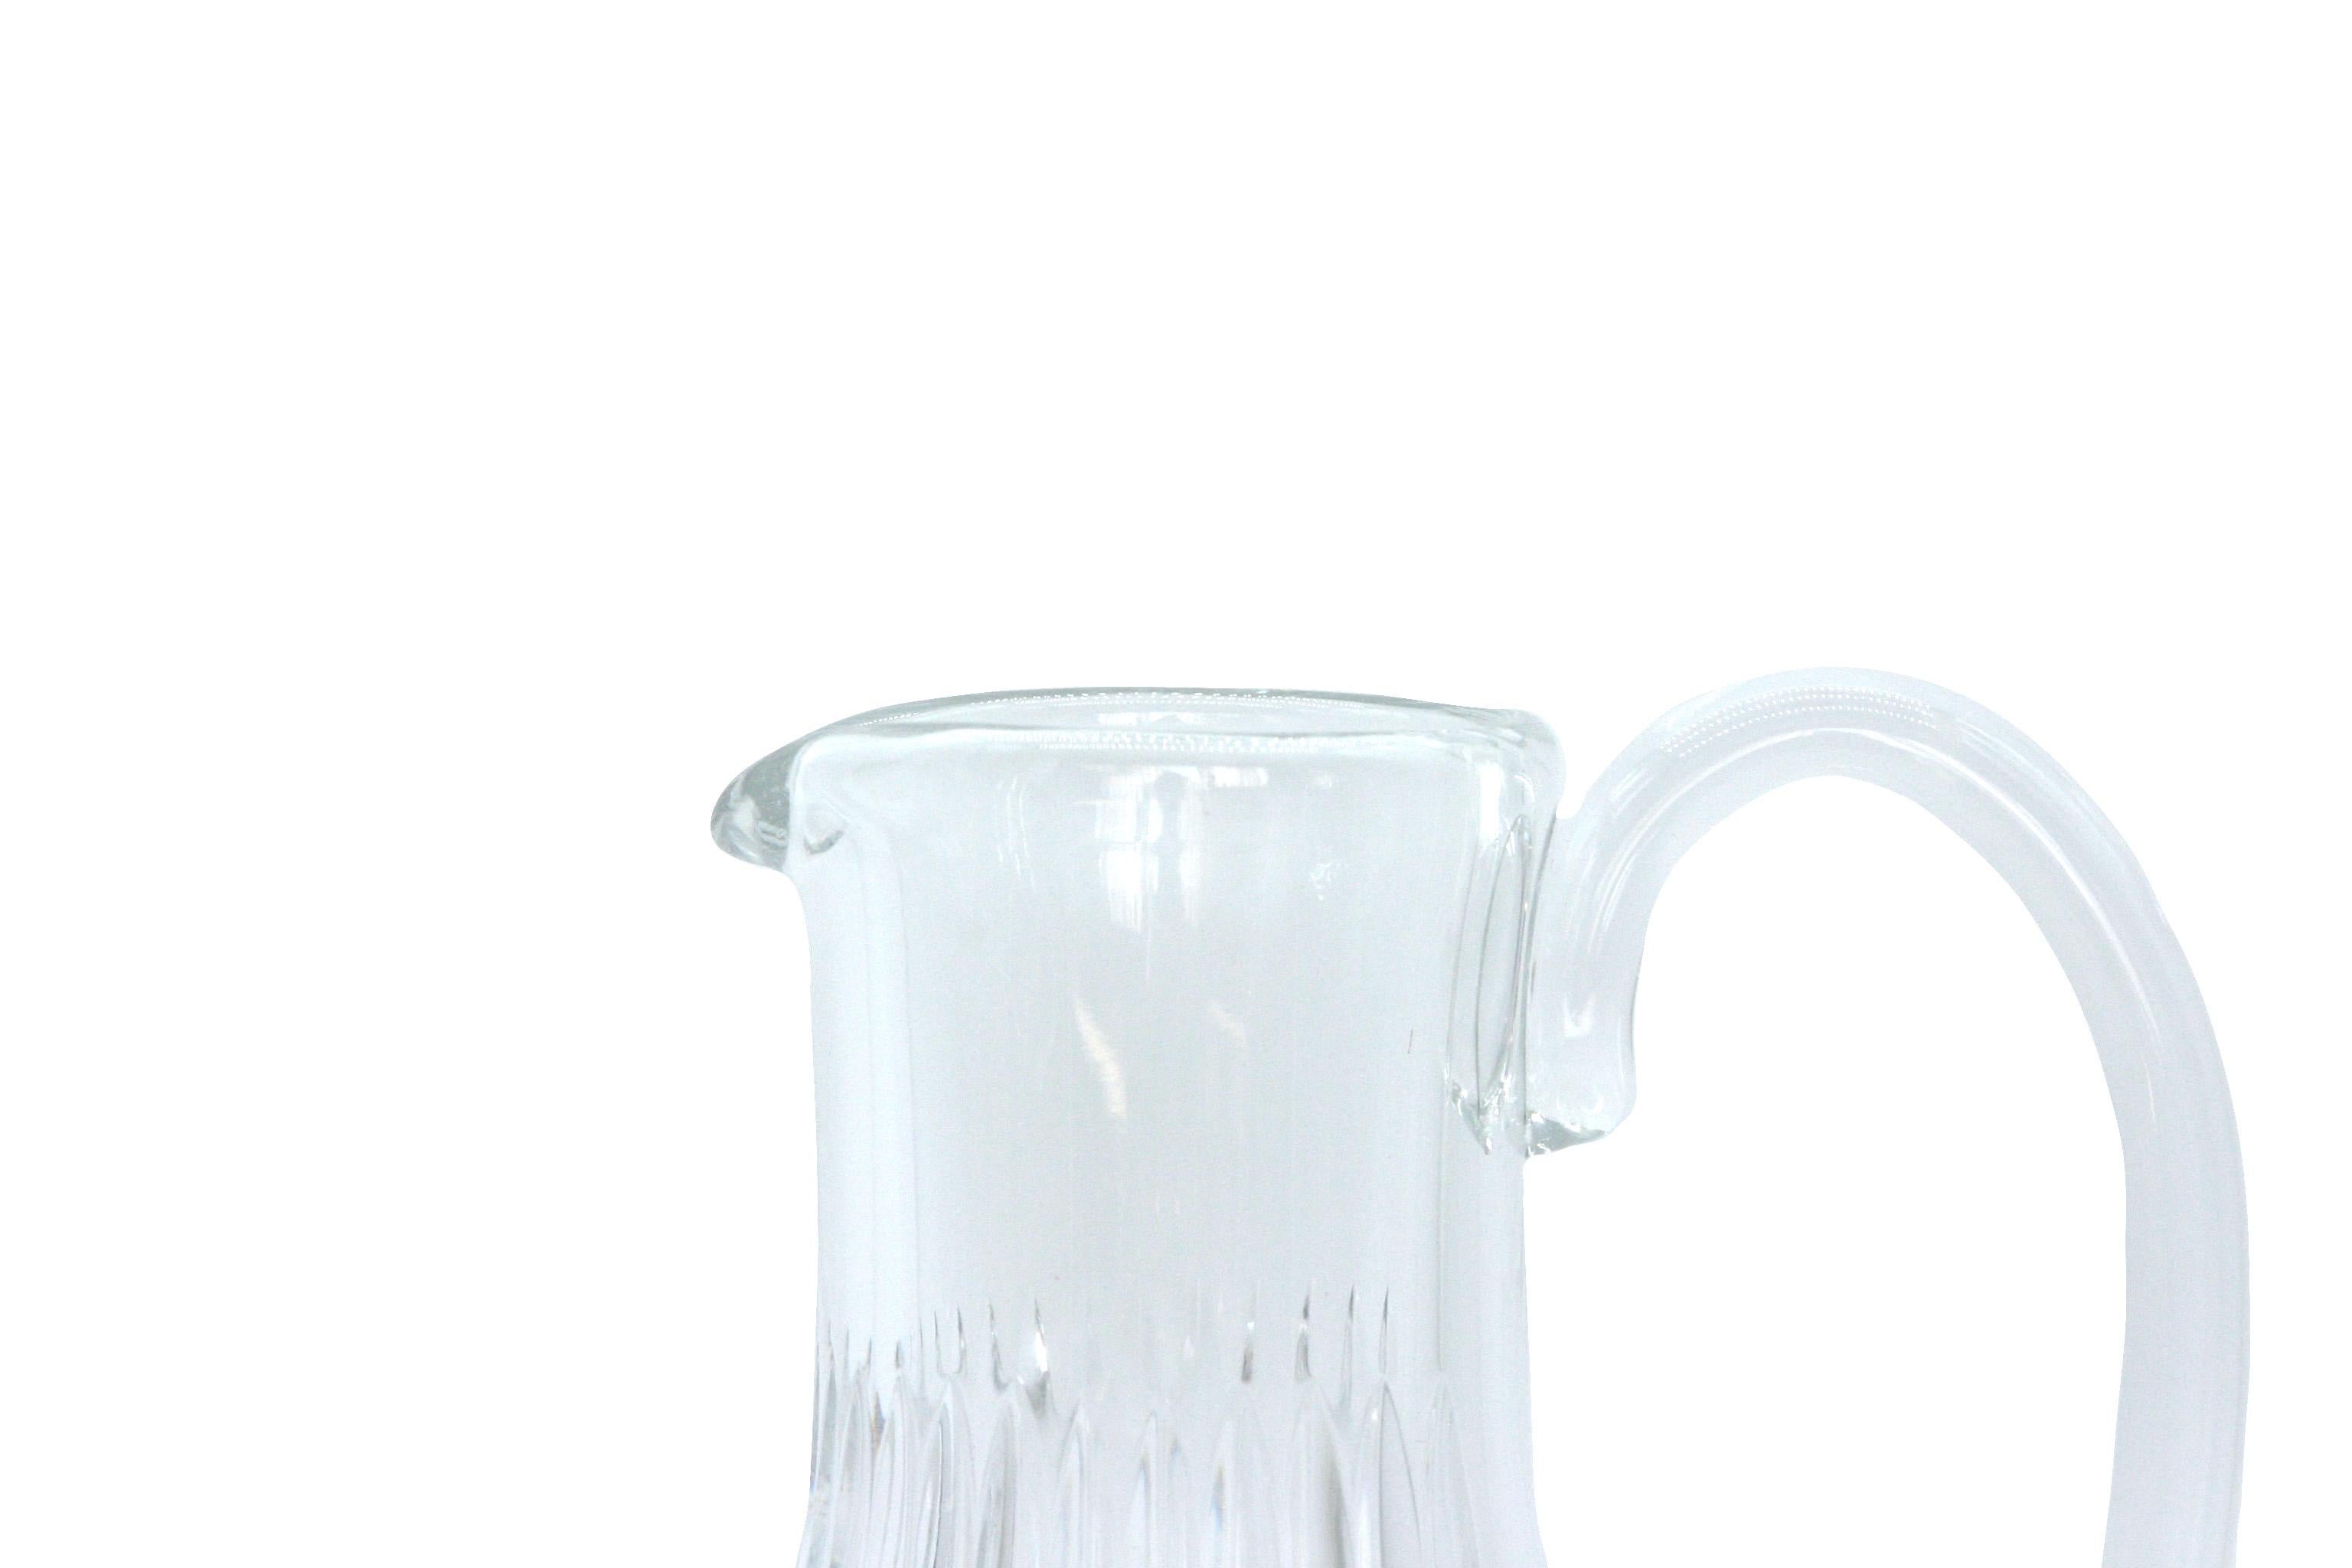 Baccarat crystal barware / tableware serving pitcher with side handle & exterior cut crystal design details. The pitcher is in great condition. Maker's mark etched undesigned. Minor wear. The pitcher stands about 9 1/2 inches x 6 inches.